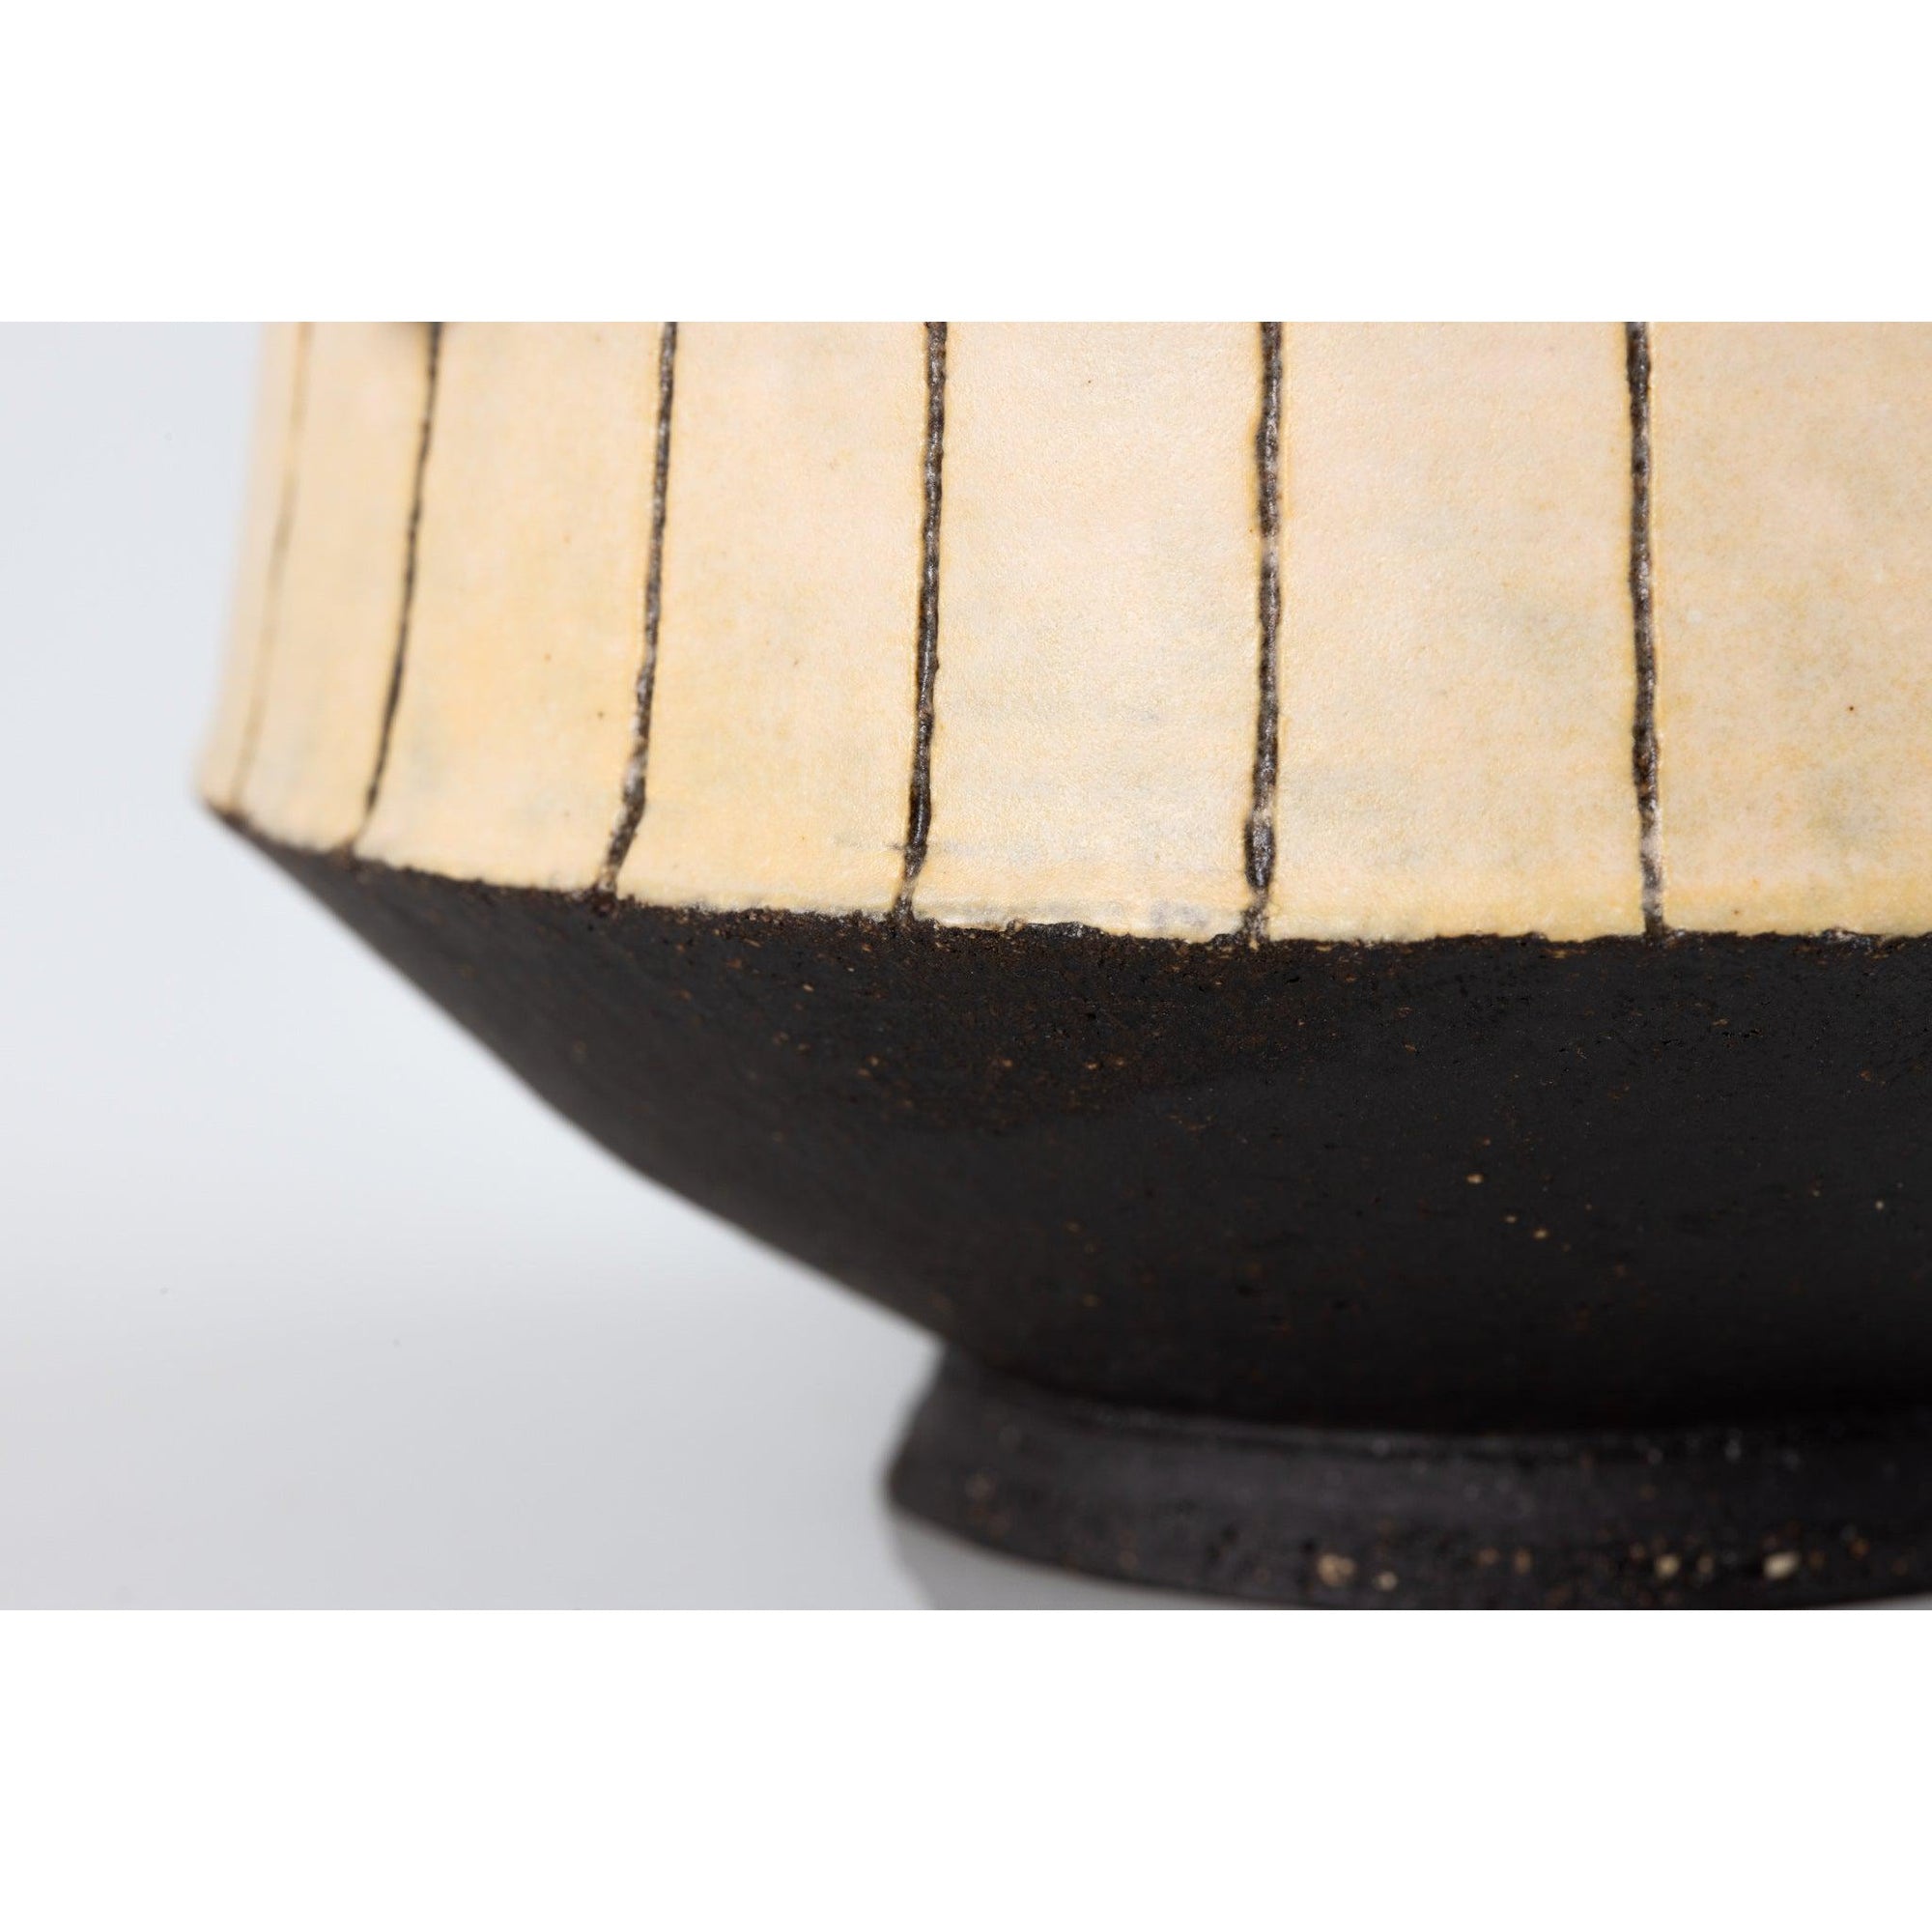 'AP39 Black Stripy Vessel - Amber' by Ania Perkowska, available at Padstow Gallery, Cornwall